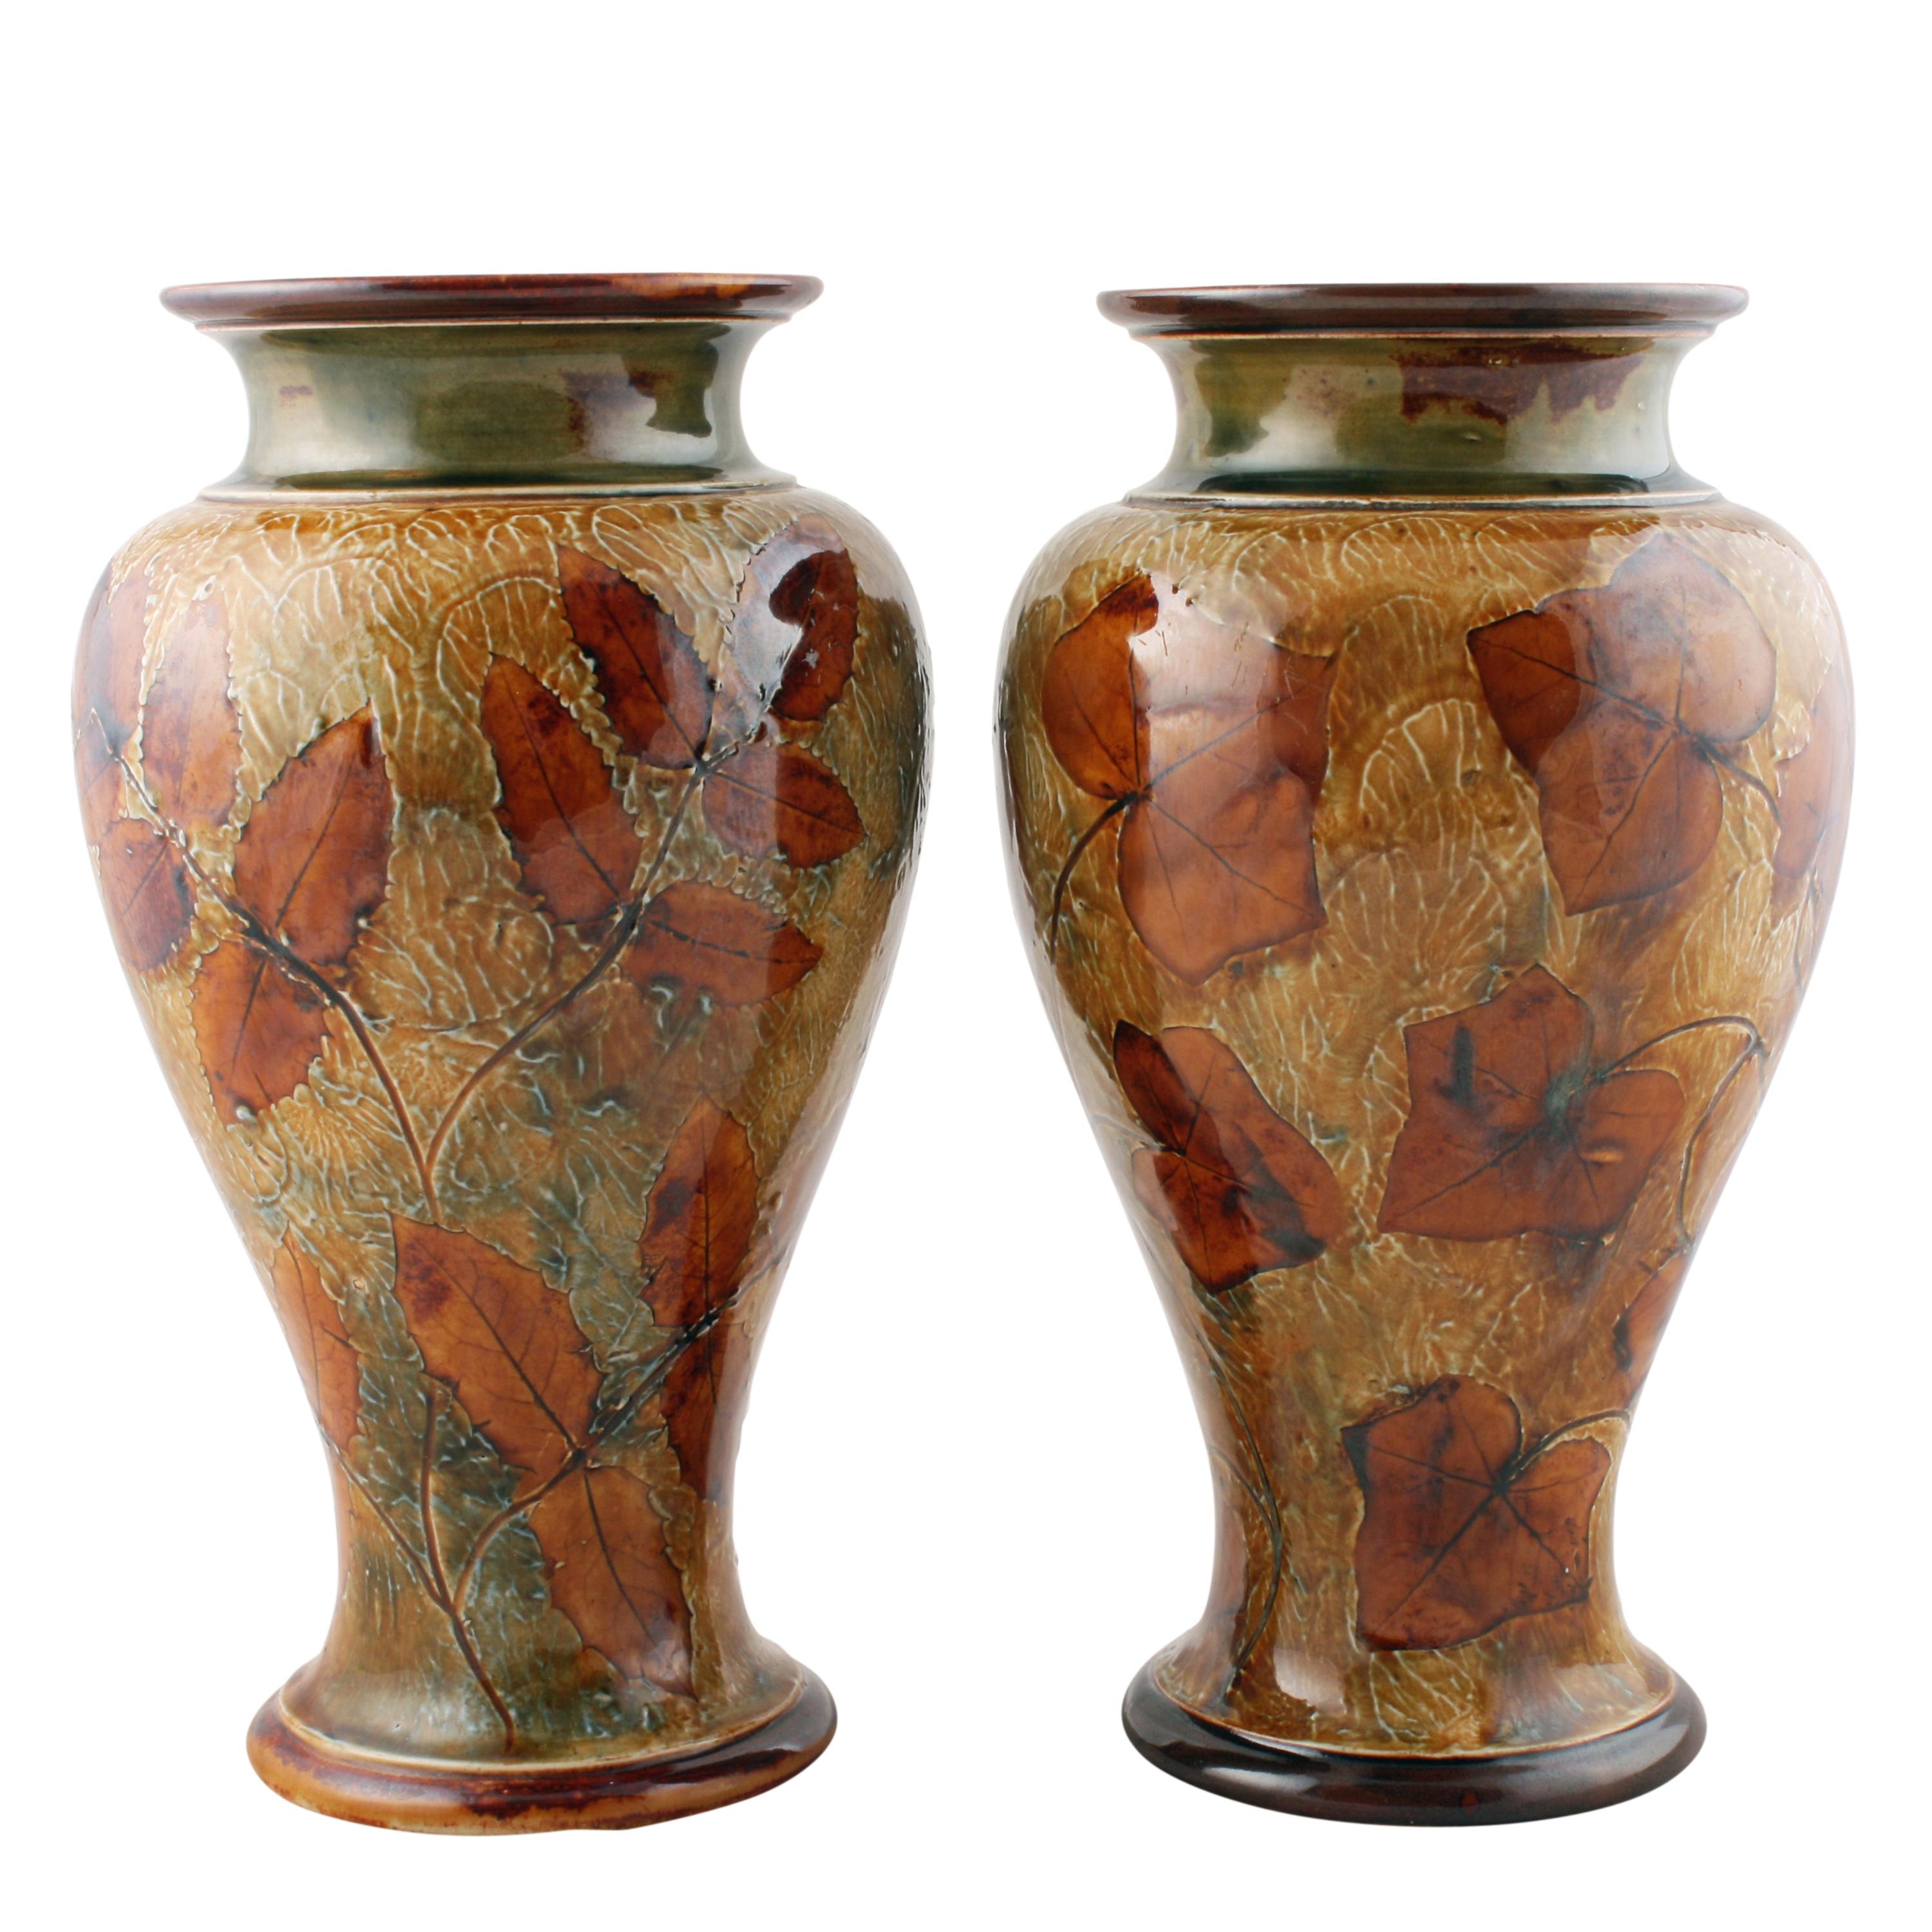 Pair of Royal Doulton vases


A pair of early 20th century Edwardian Royal Doulton glazed pottery vases.

The vases are decorated with natural looking leaves (possibly rose & lily leaves) on one and rose leaves on the other.

The undersides